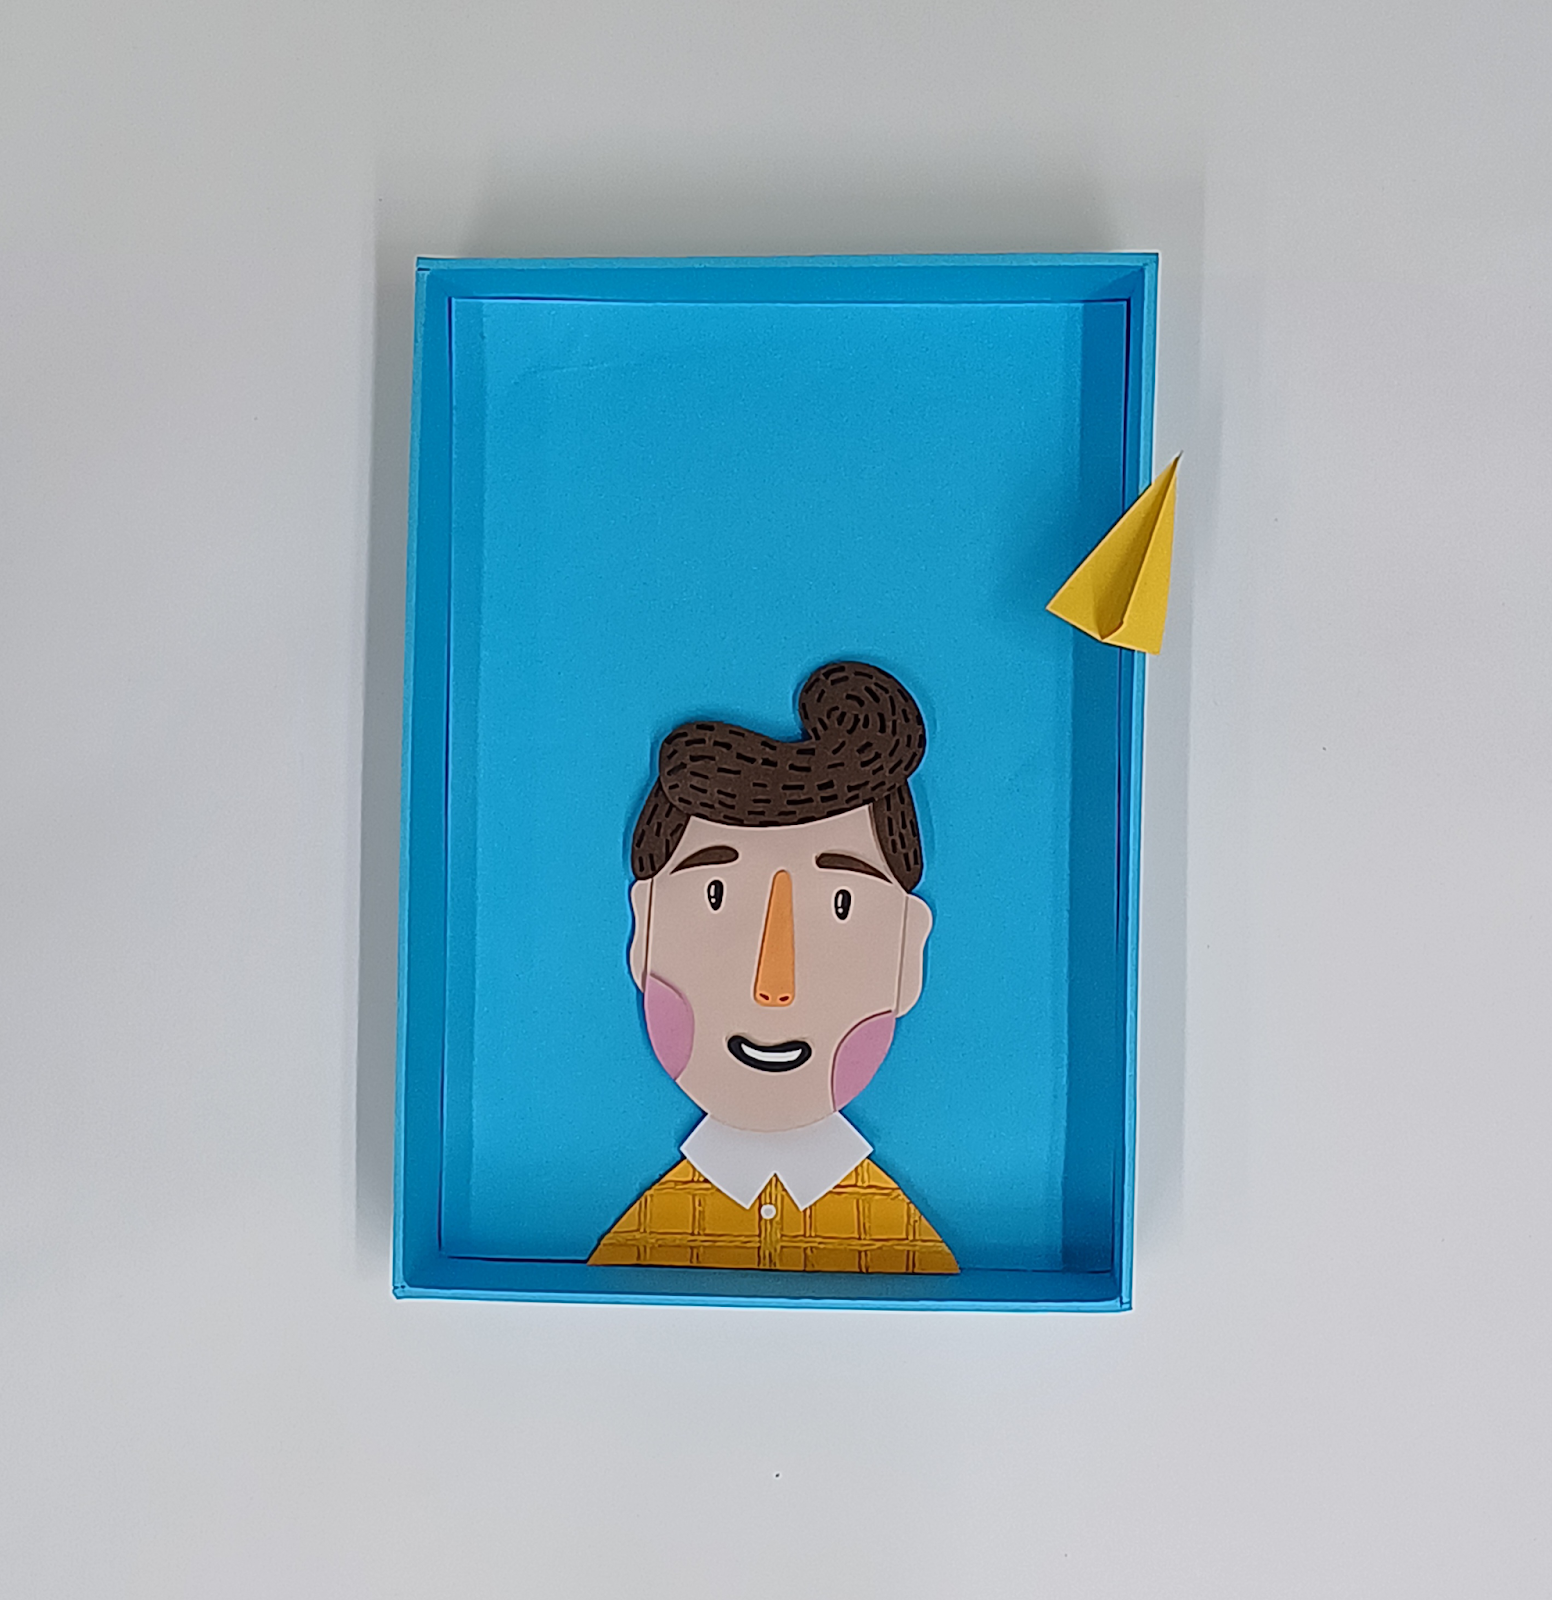 Learn How to Make a DIY Boy Figurine Paper Craft for Kids